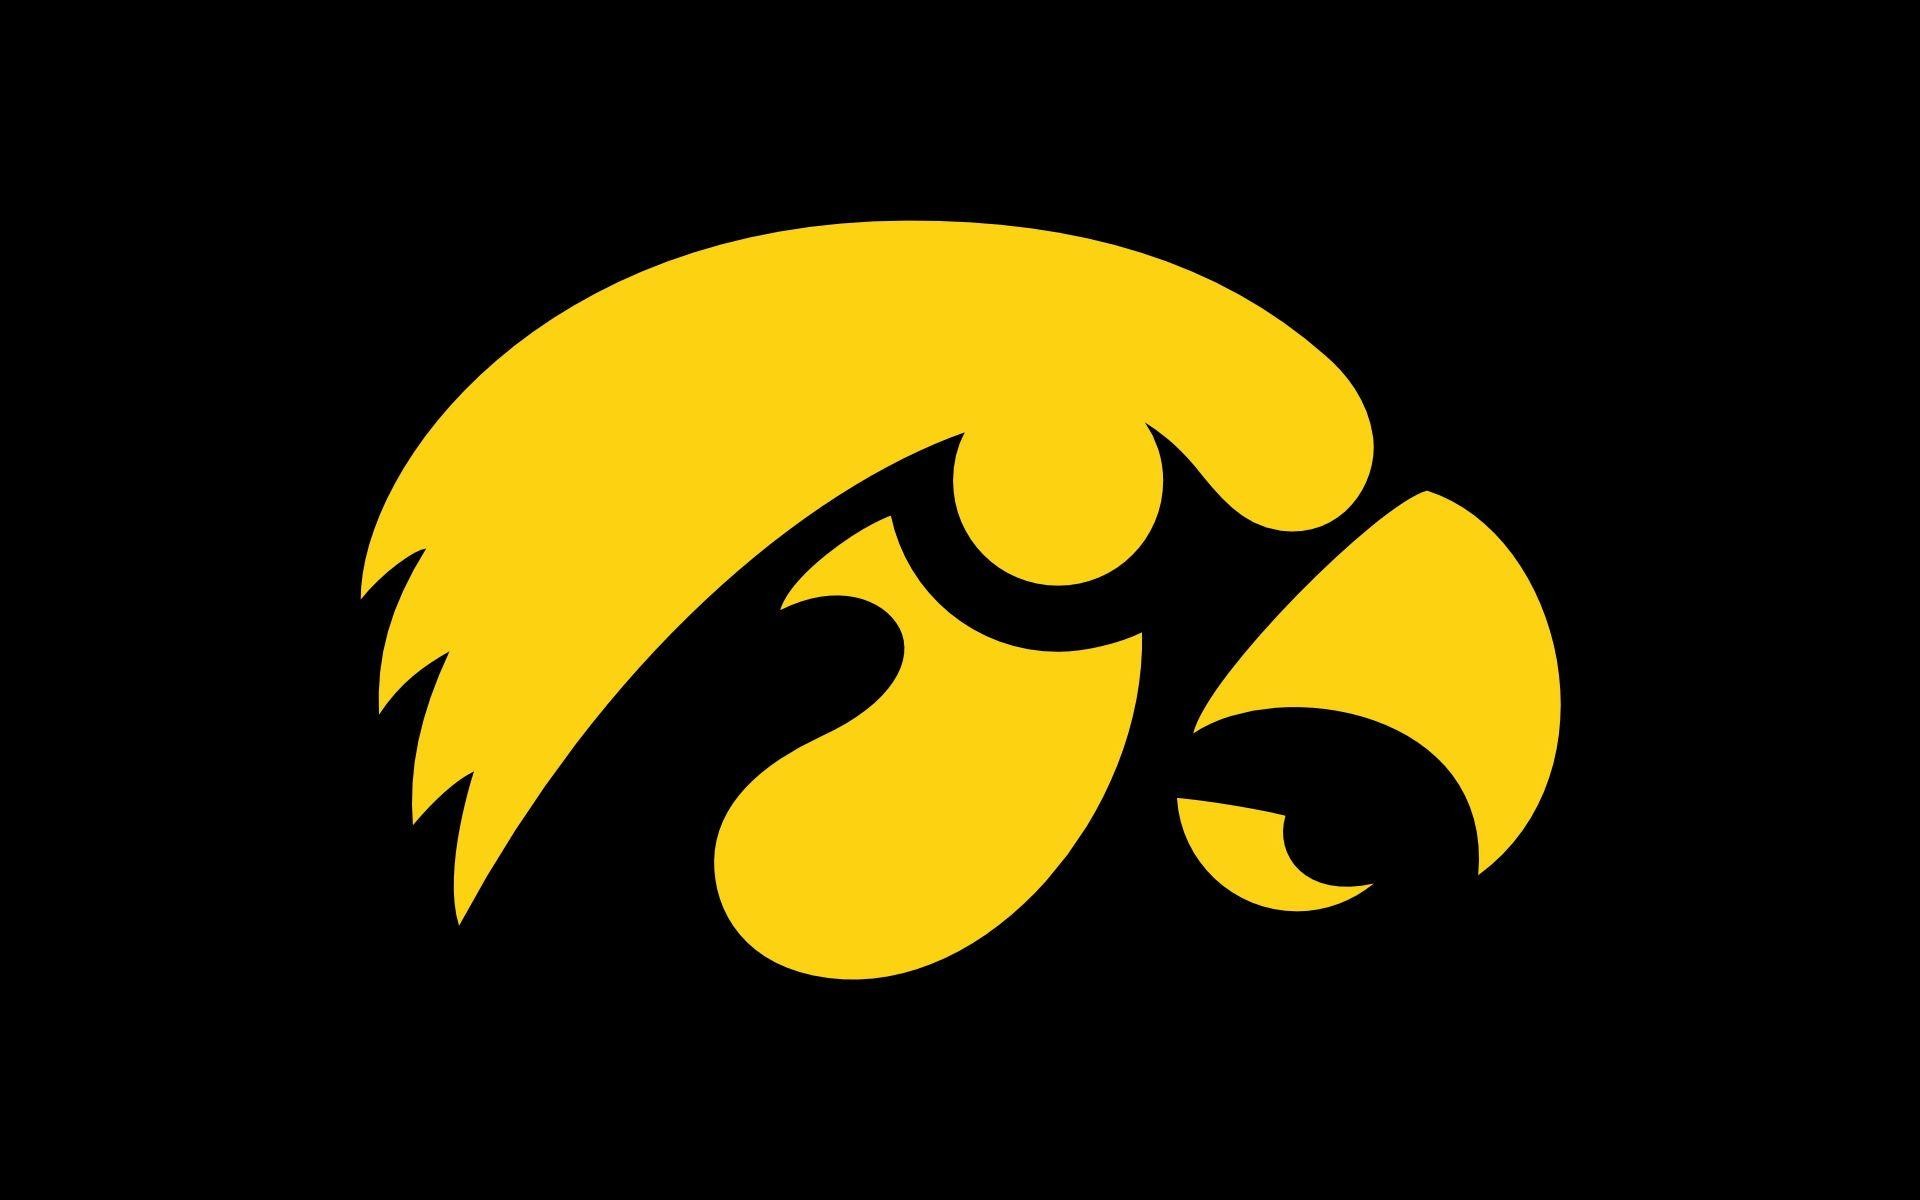 Iowa Hawkeyes Wallpapers (69+ pictures)